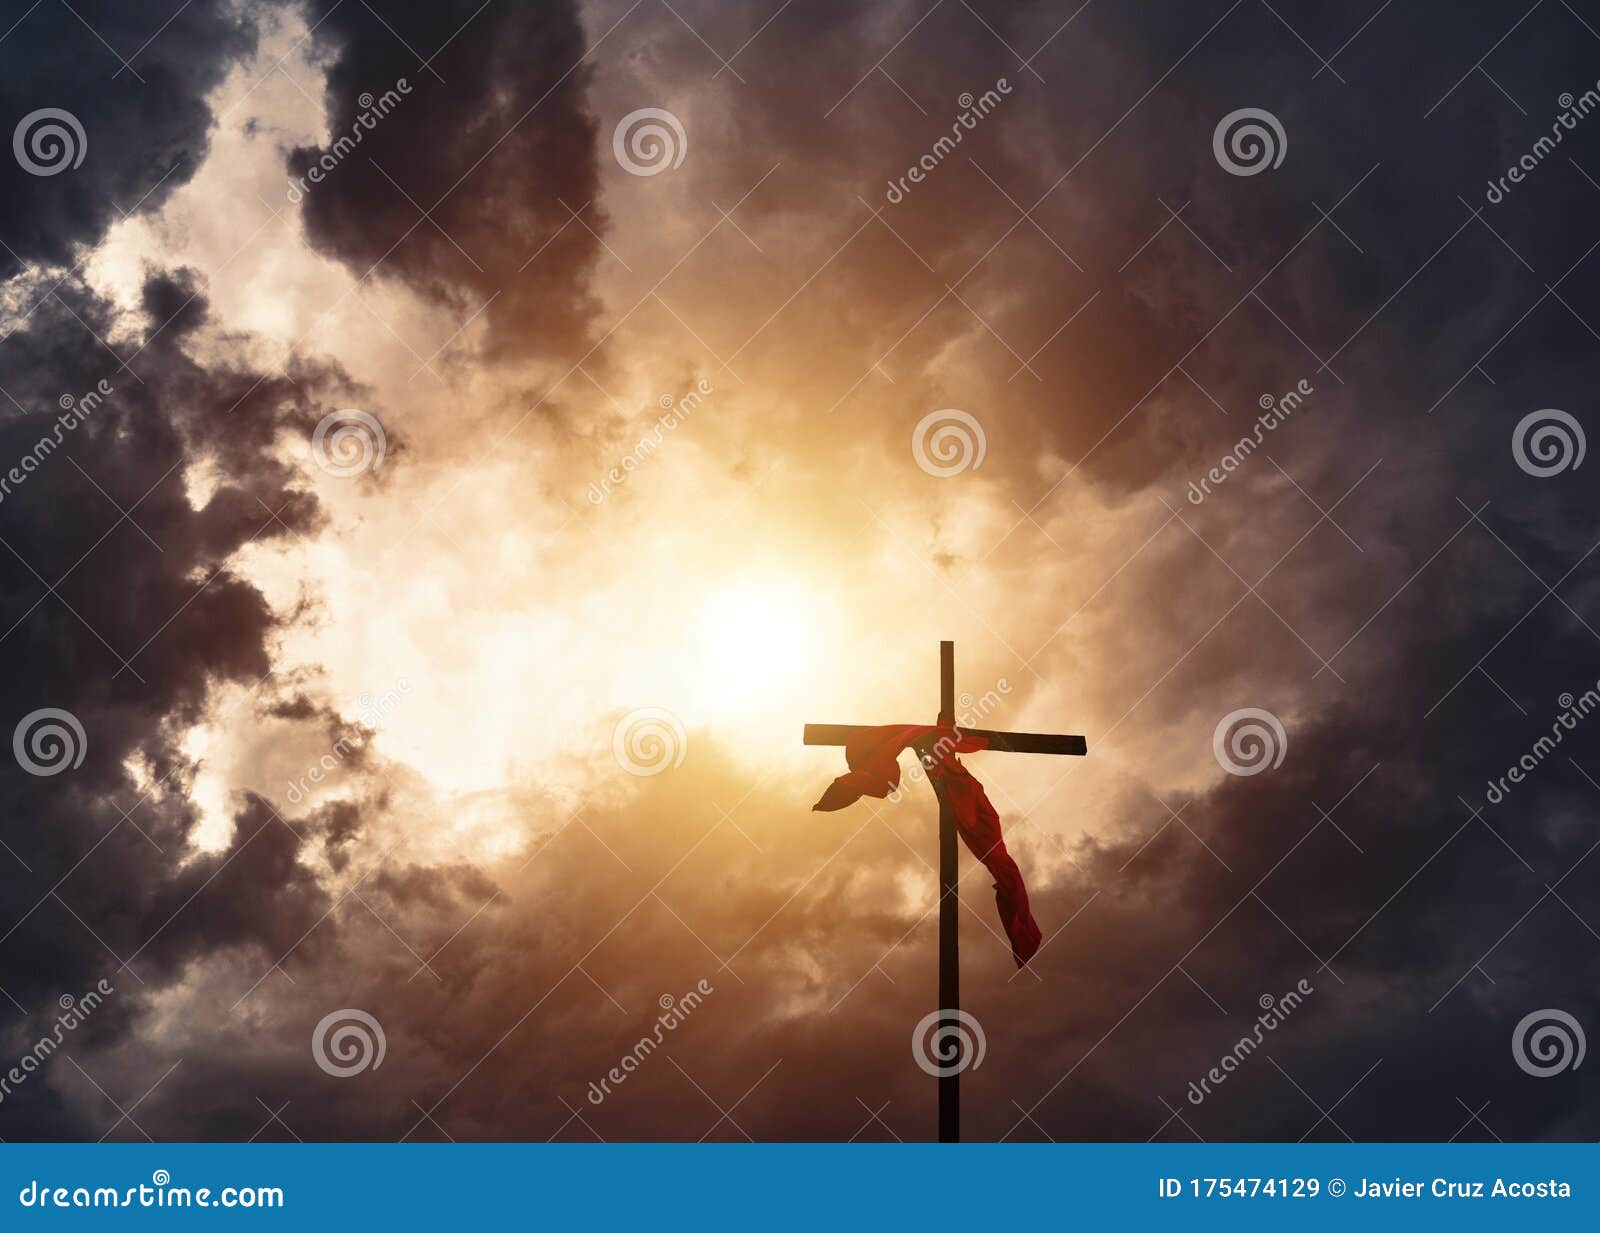 christianity cross and stormy clouds